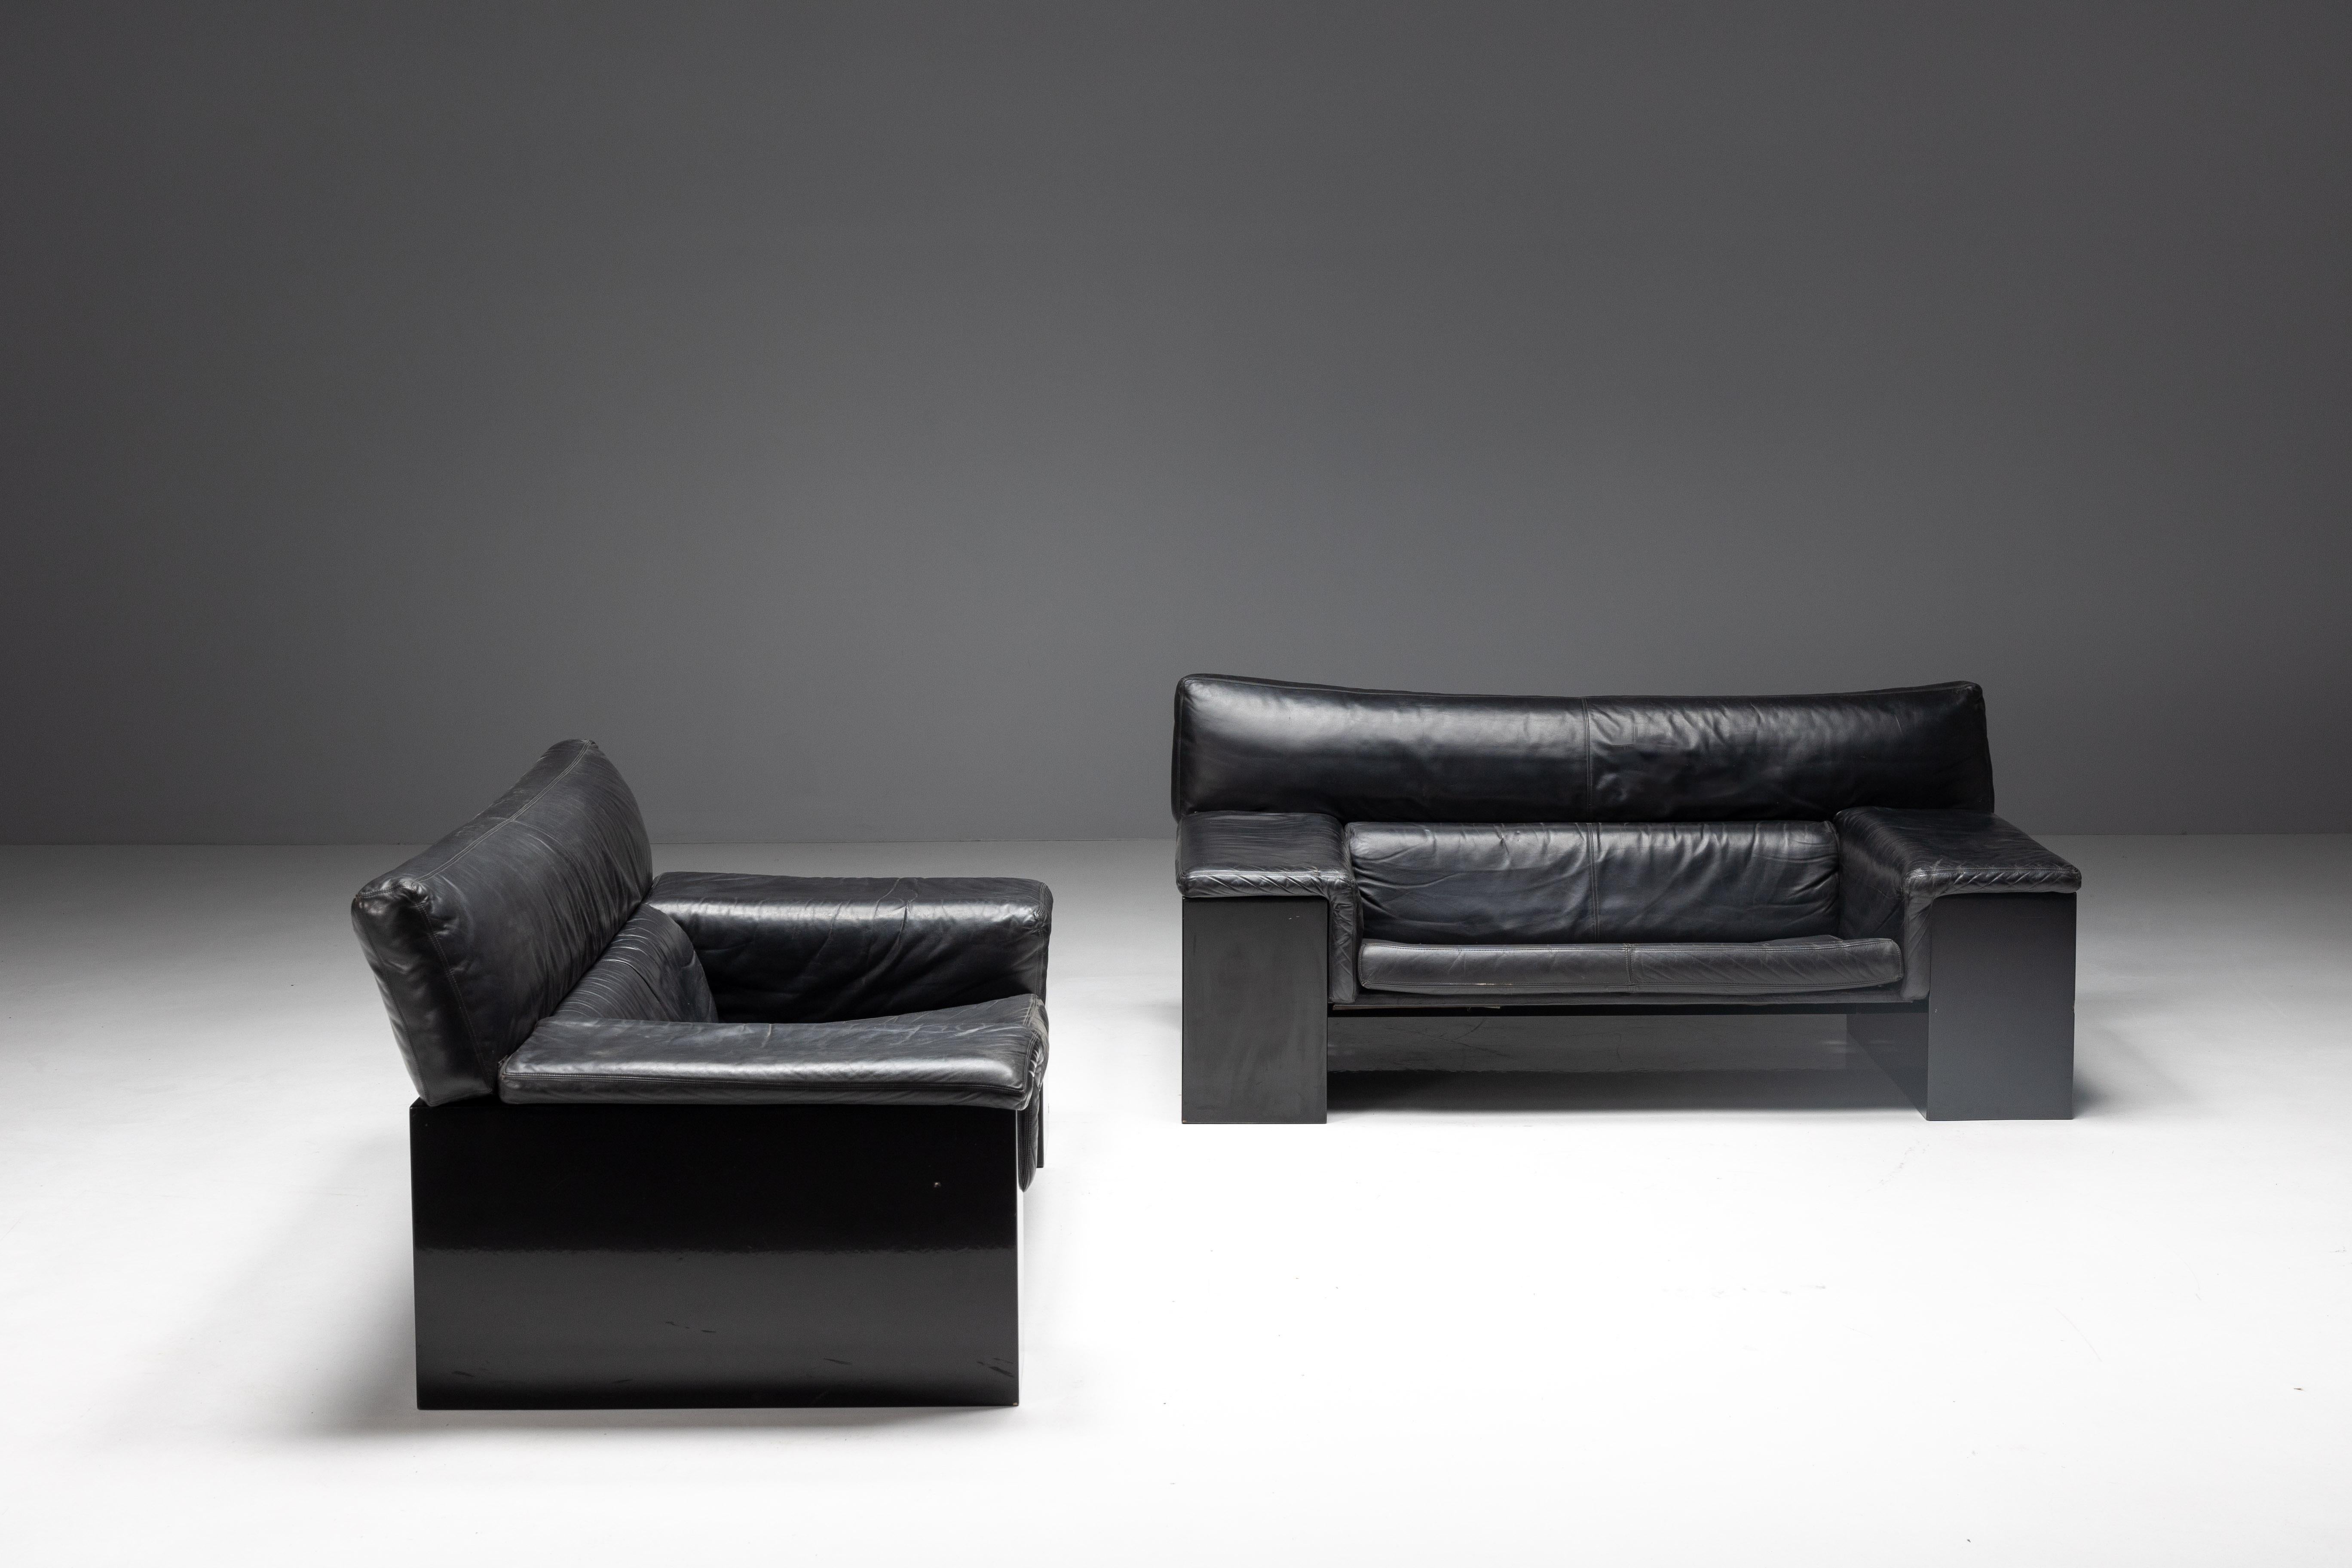 Two exceptional sofas from the award-winning Brigadier Series by renowned Italian architect and designer, Cini Boeri (1924–2020). Crafted in the 1980s for Knoll, these sofas feature a sleek black high-gloss lacquered wooden frame complemented by